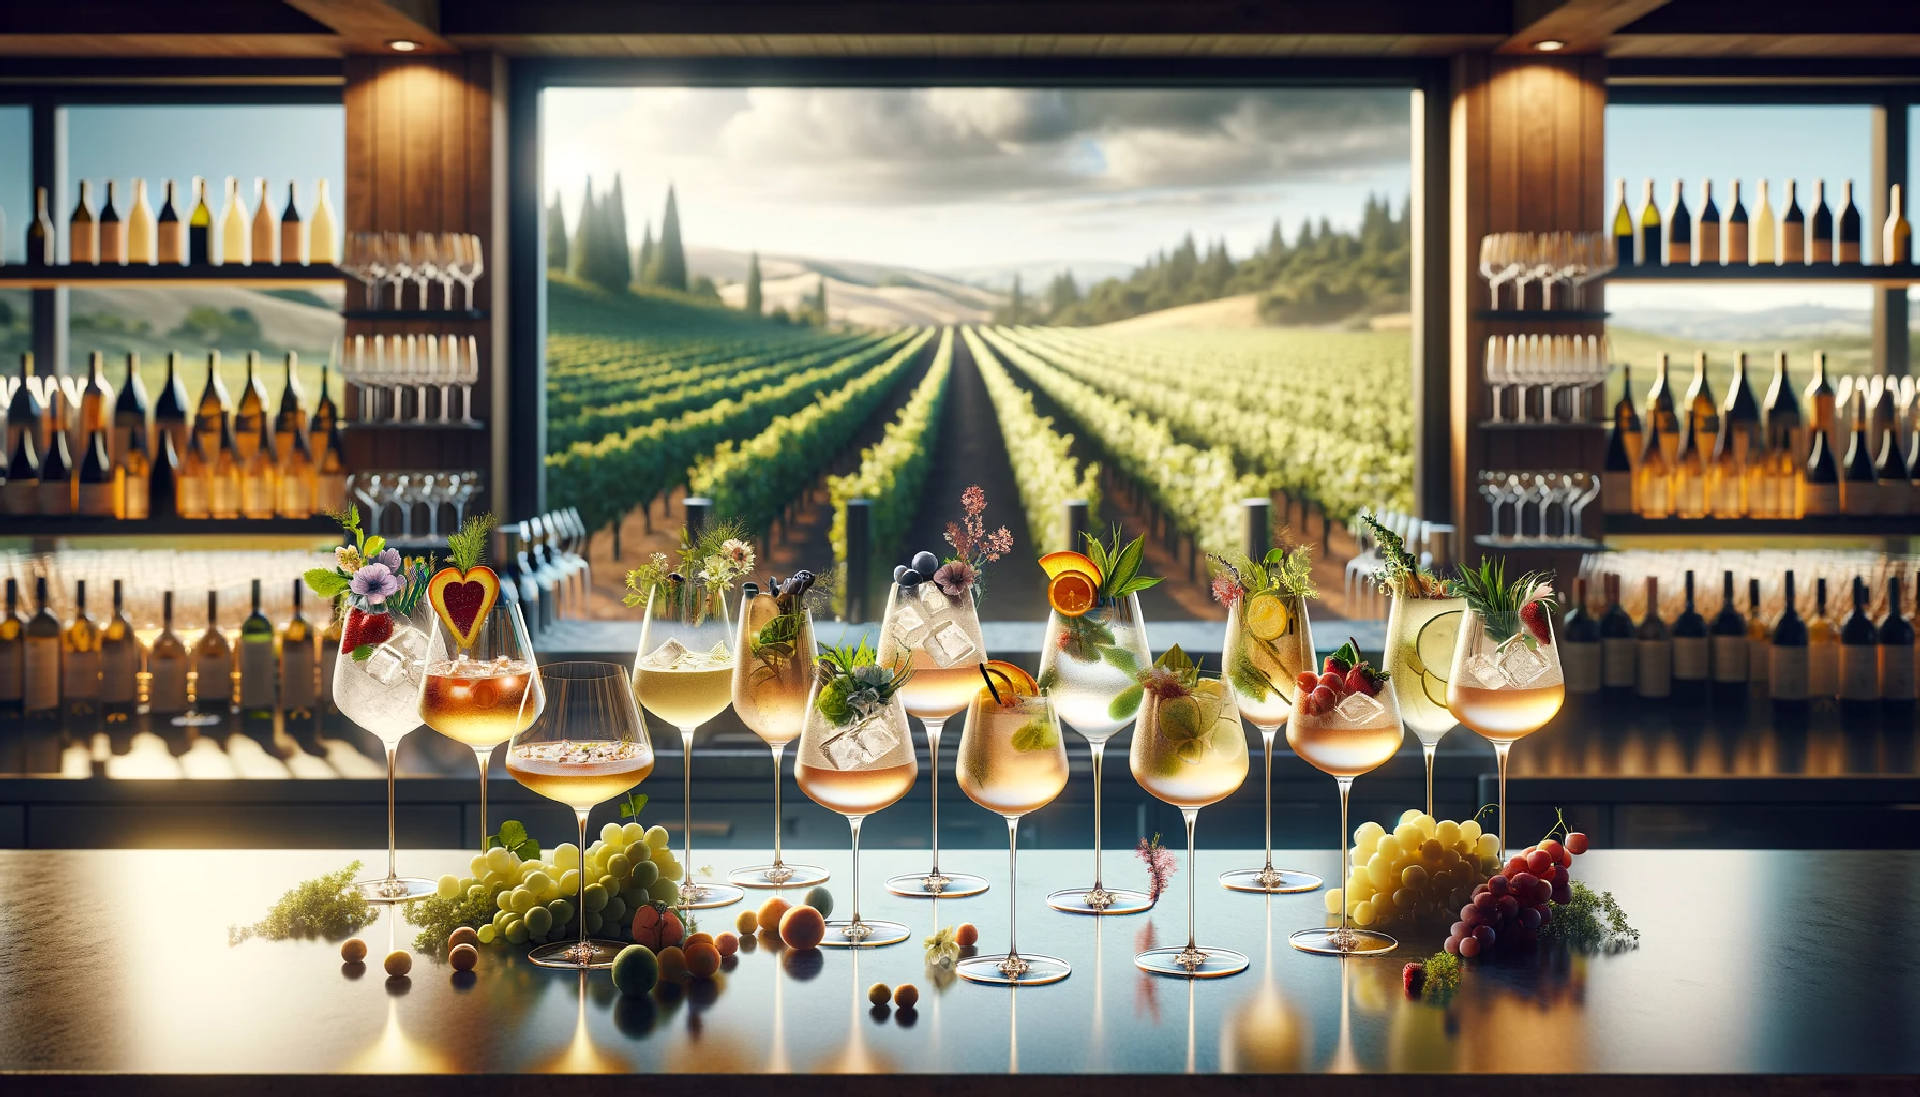  A collection of Sauvignon Blanc cocktails, elegantly presented in various glasses on a polished wooden bar. Each cocktail is garnished uniquely by umut taydaş